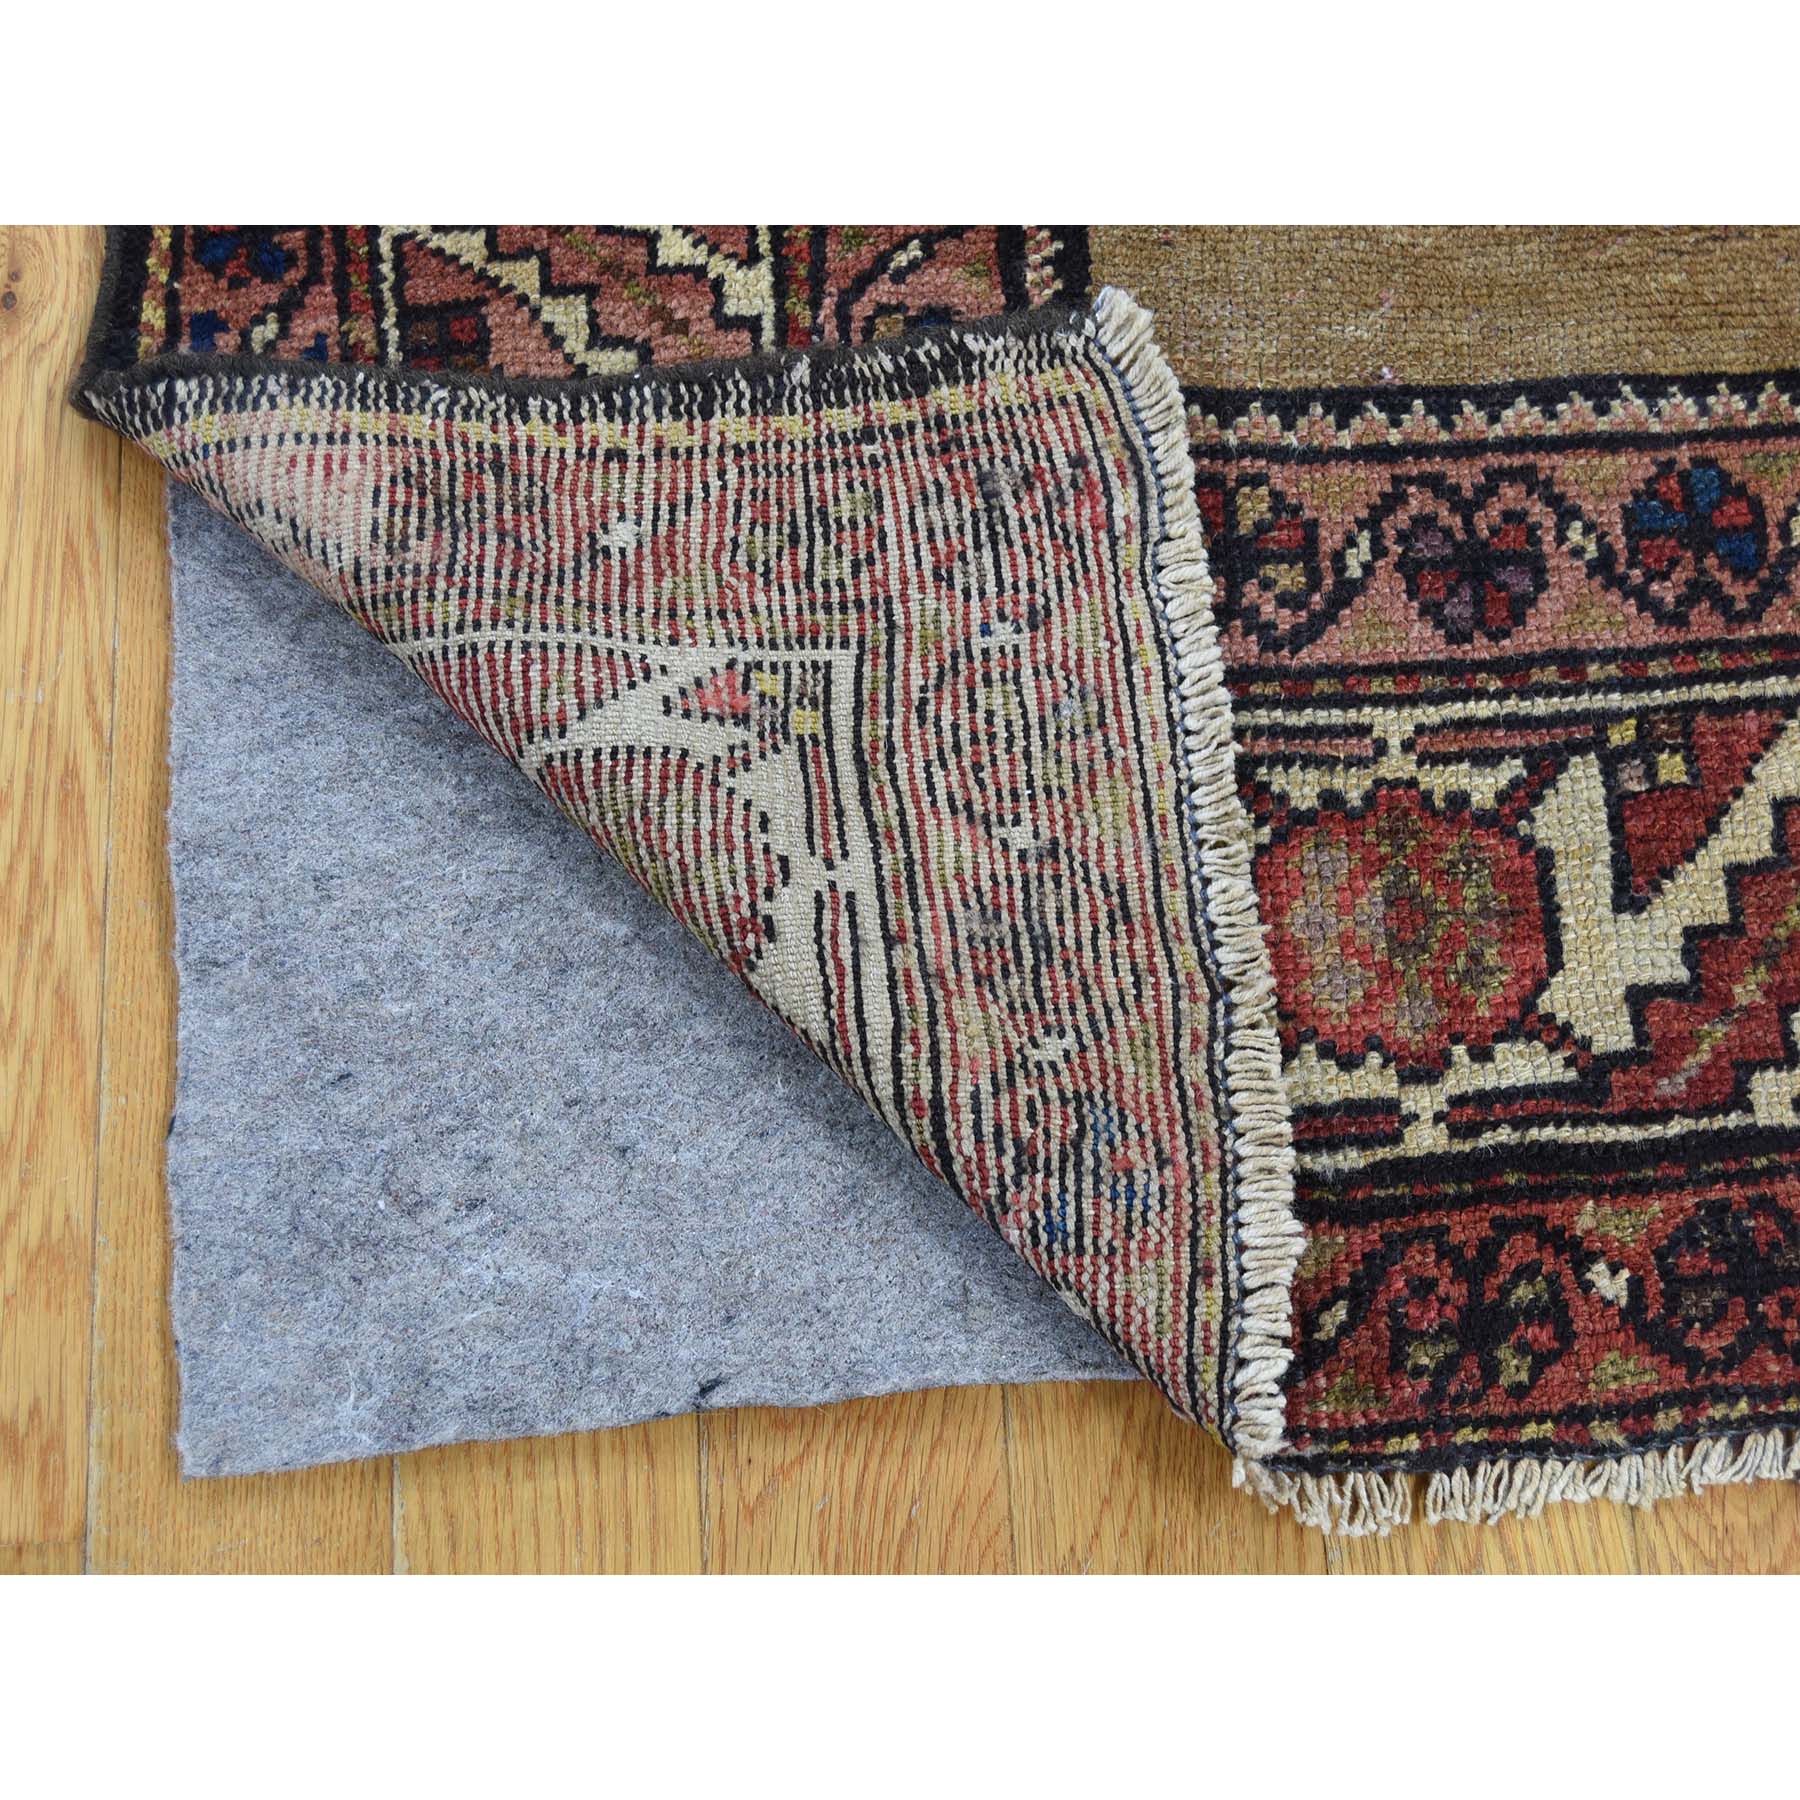 4-3 x5-10  Antique Serab Camel Hair Good Condition Hand Knotted Rug 